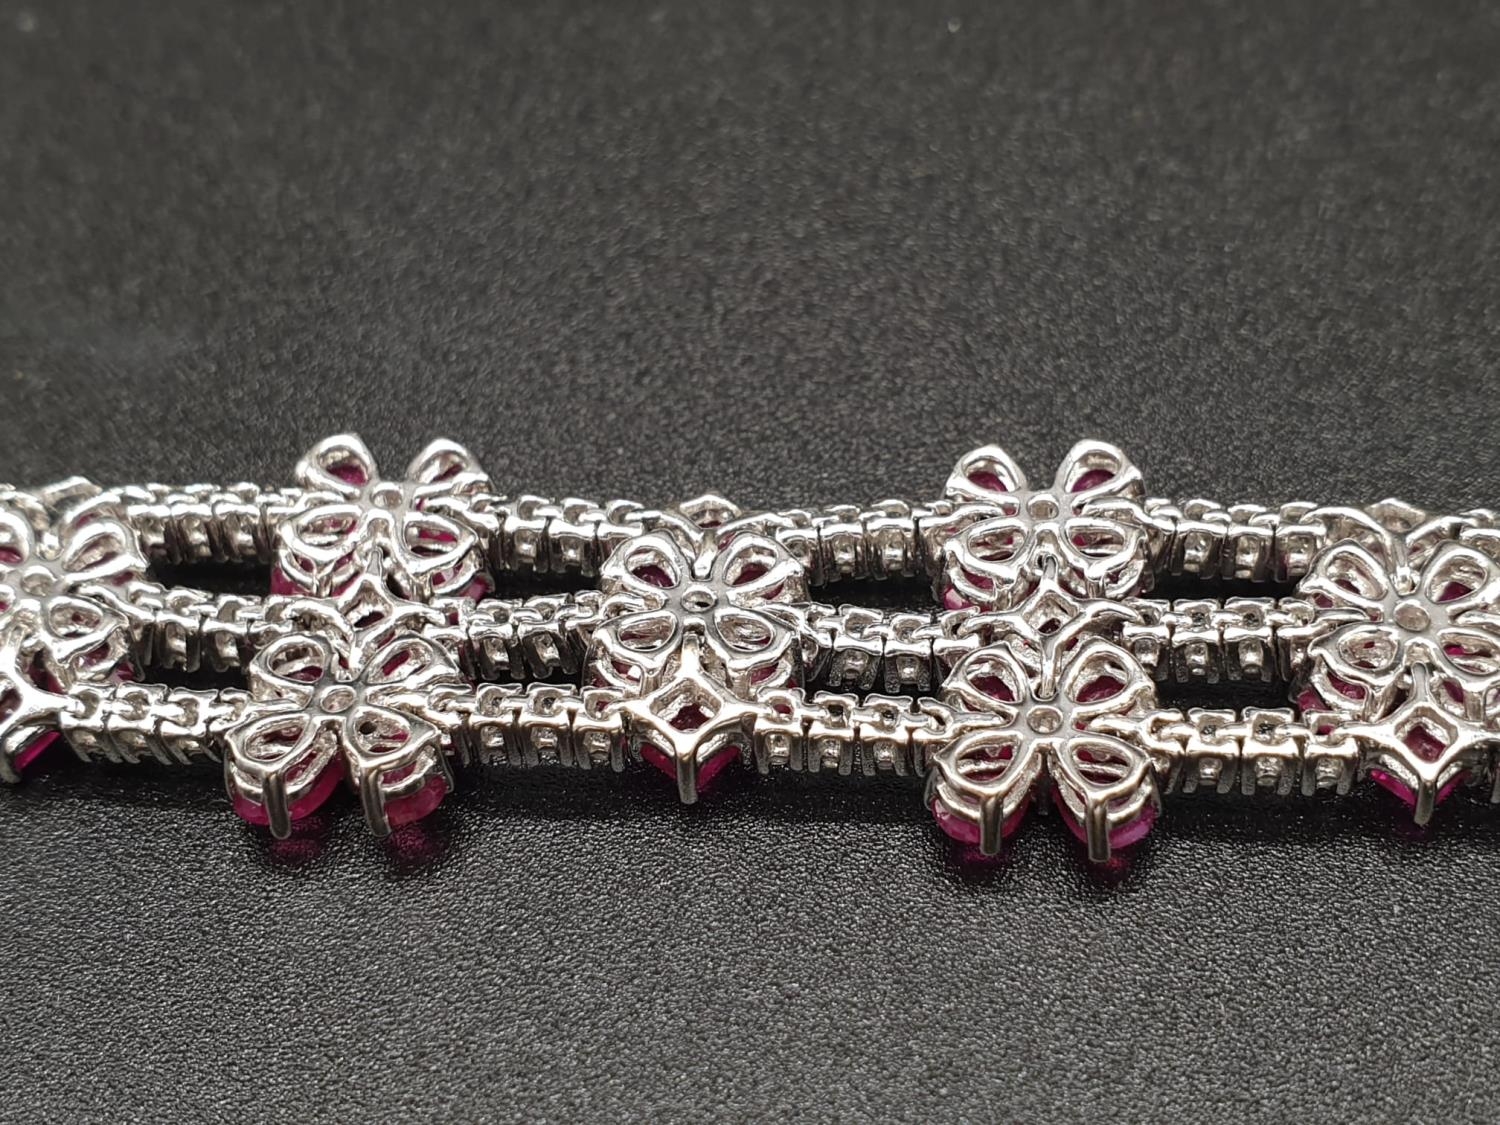 AN EXTREMELY ATTRACTIVE 3 ROW 18K WHITE GOLD BRACELET WITH ENCRUSTED DIAMONDS AND DECORATED WITH A - Image 5 of 7